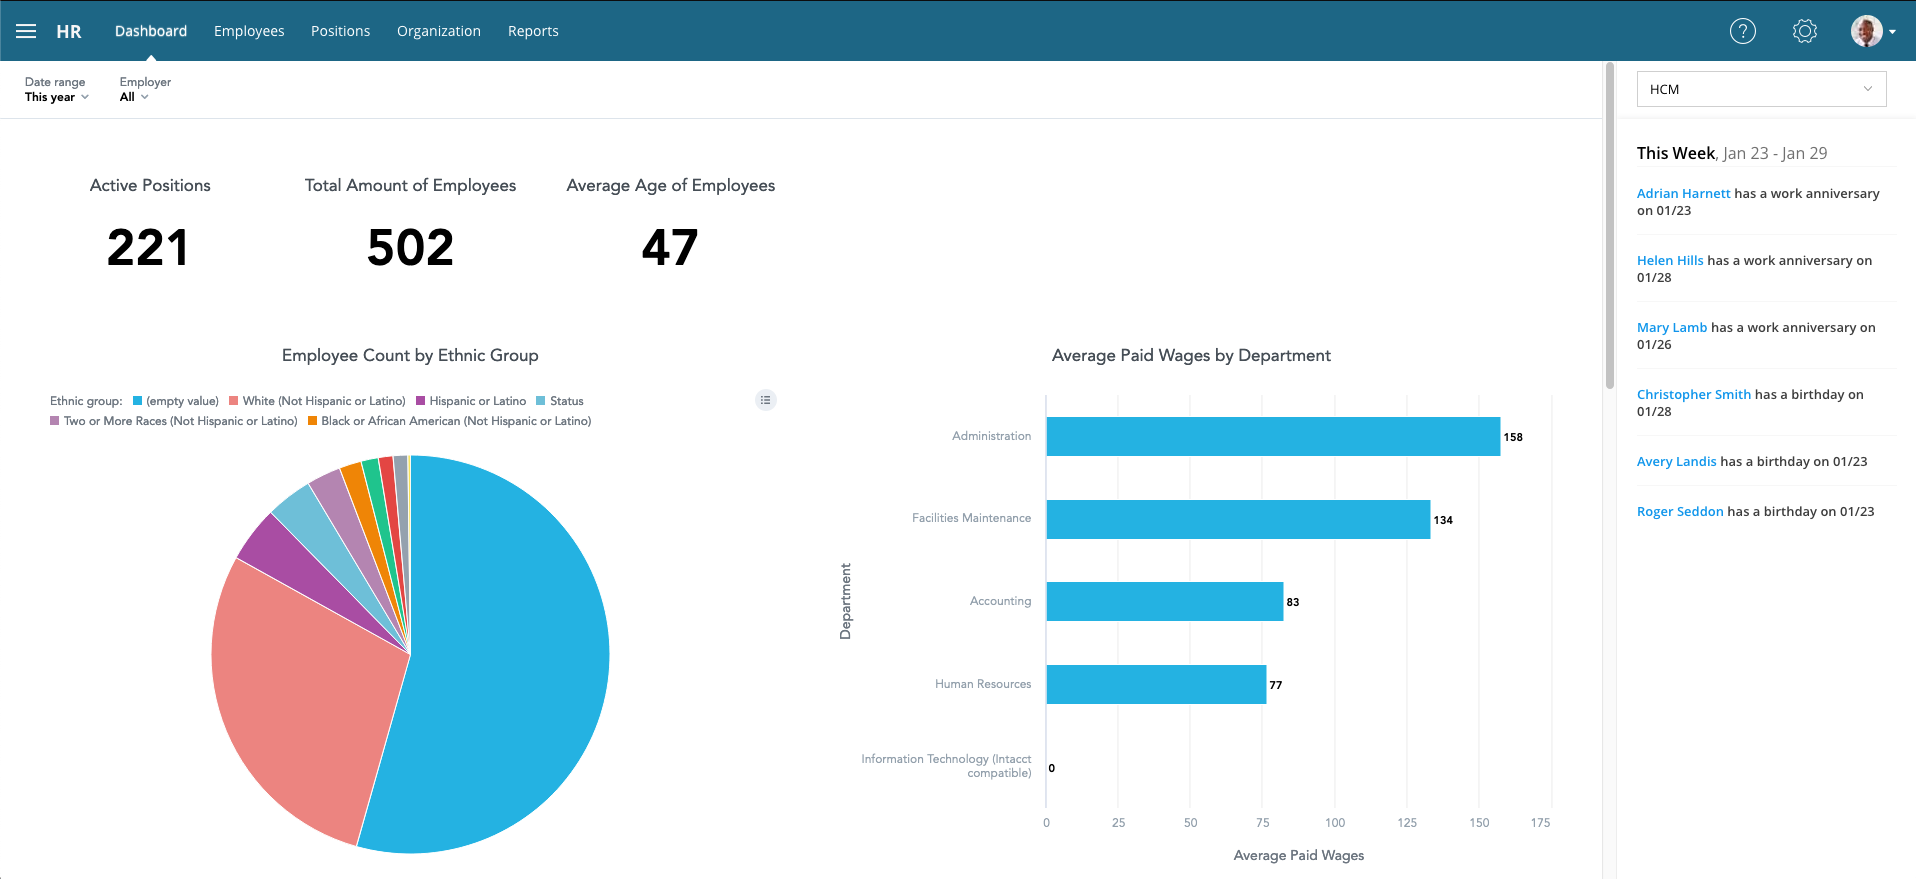 Powerful analytic dashboard can be customized for individual users to show the information they need quickly and easily.